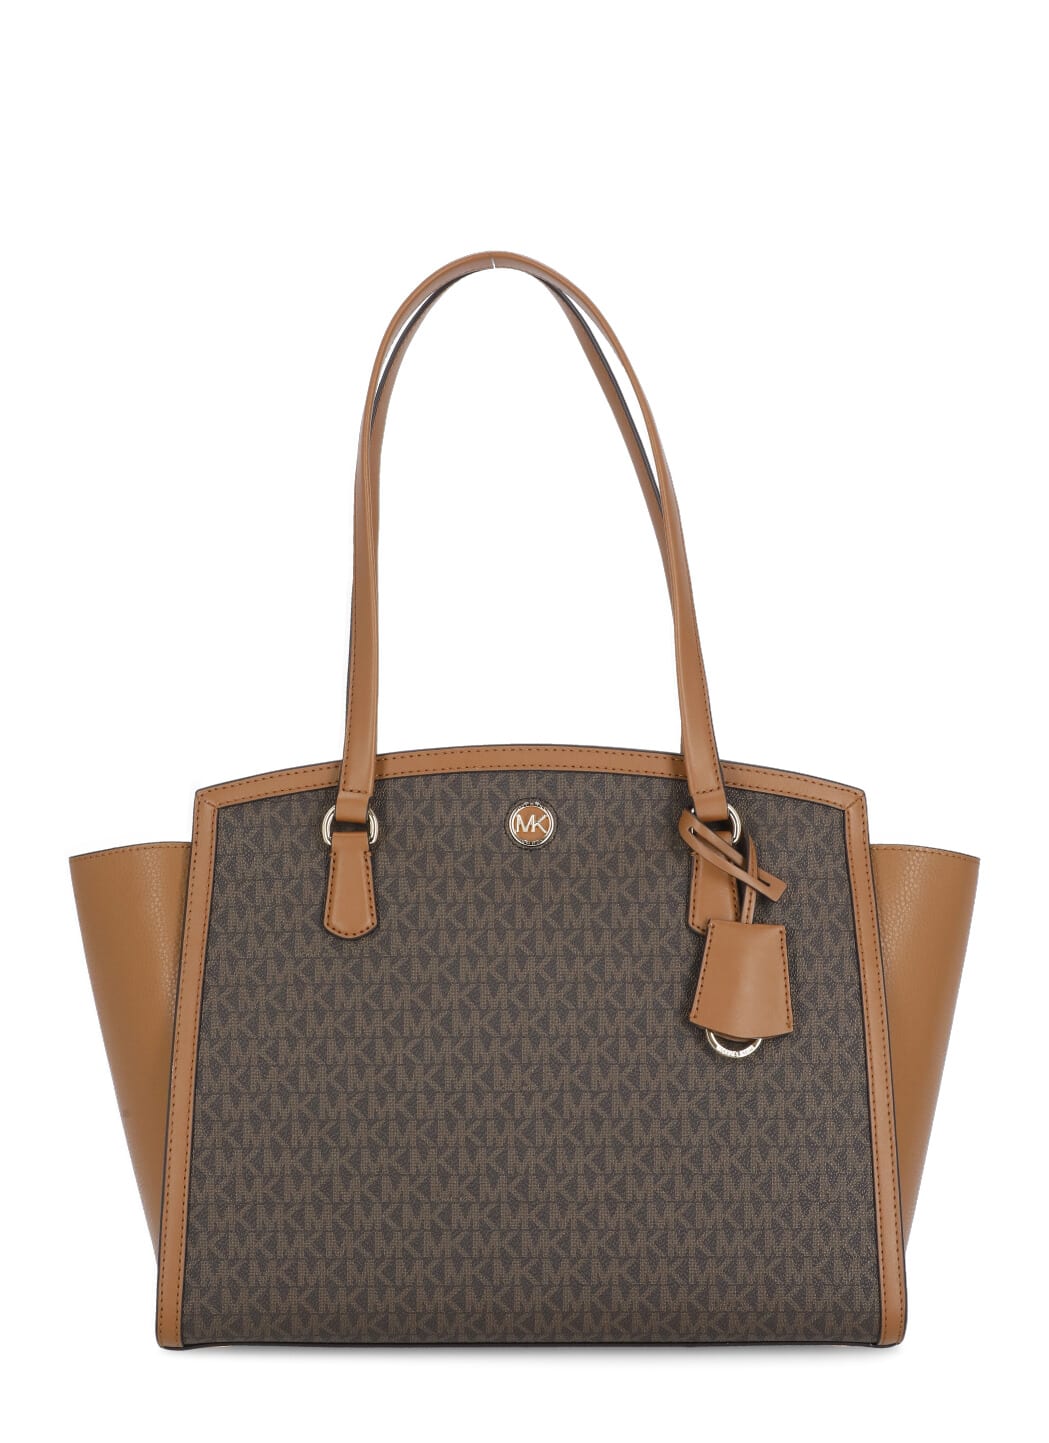 MICHAEL MICHAEL KORS Tan Canvas and Leather Tote